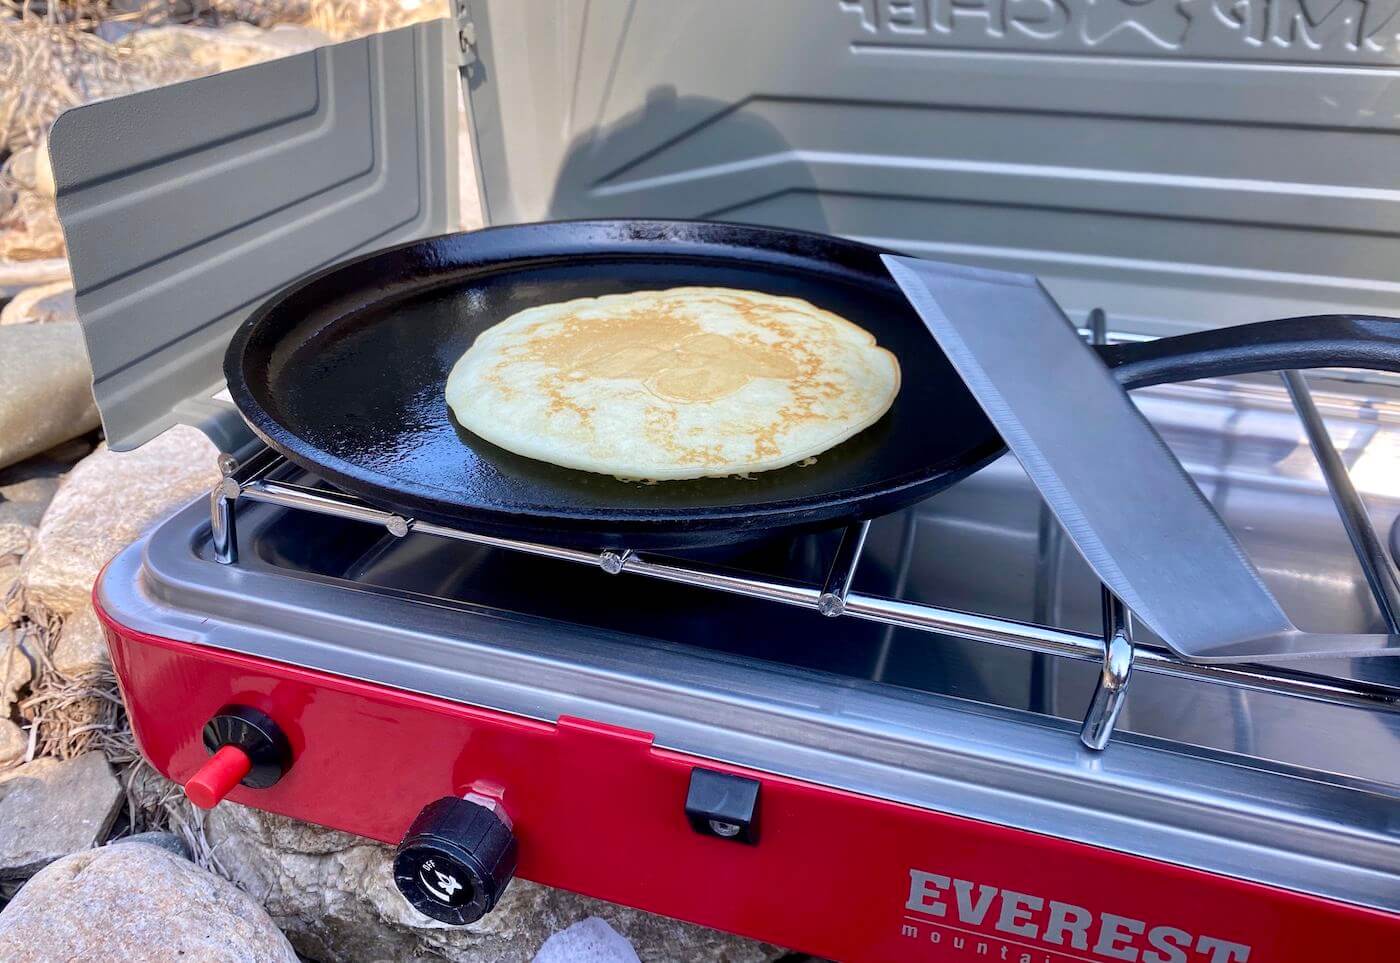 This best camping stoves photo shows a camping stove with a cooking pancake outside.